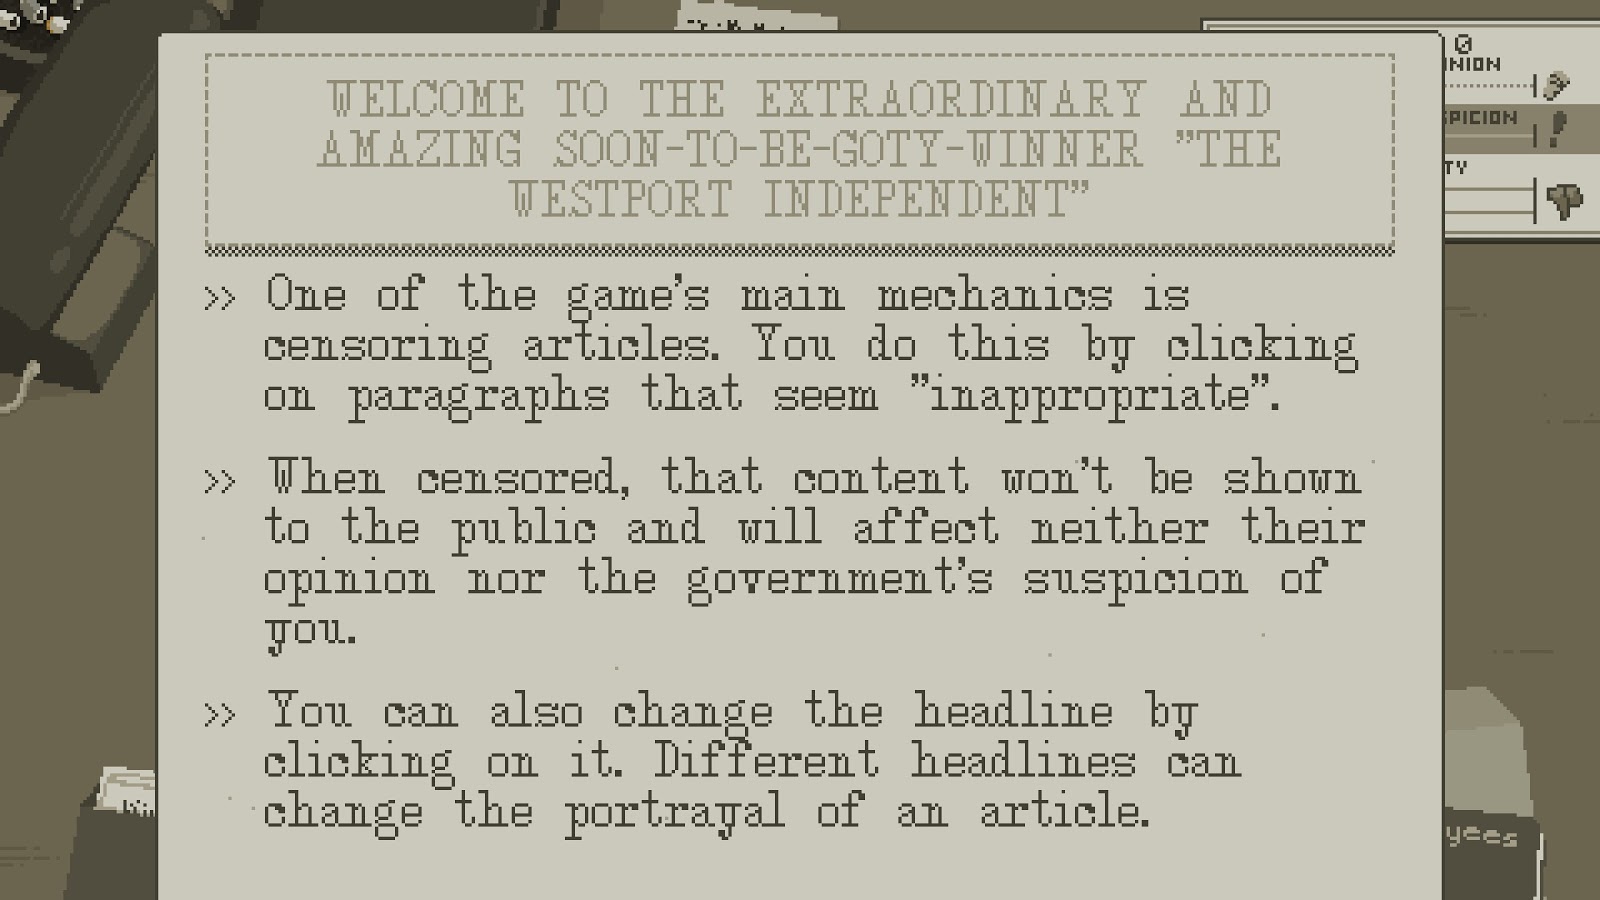 Westport Independent Is An Intense Game About Censoring The News